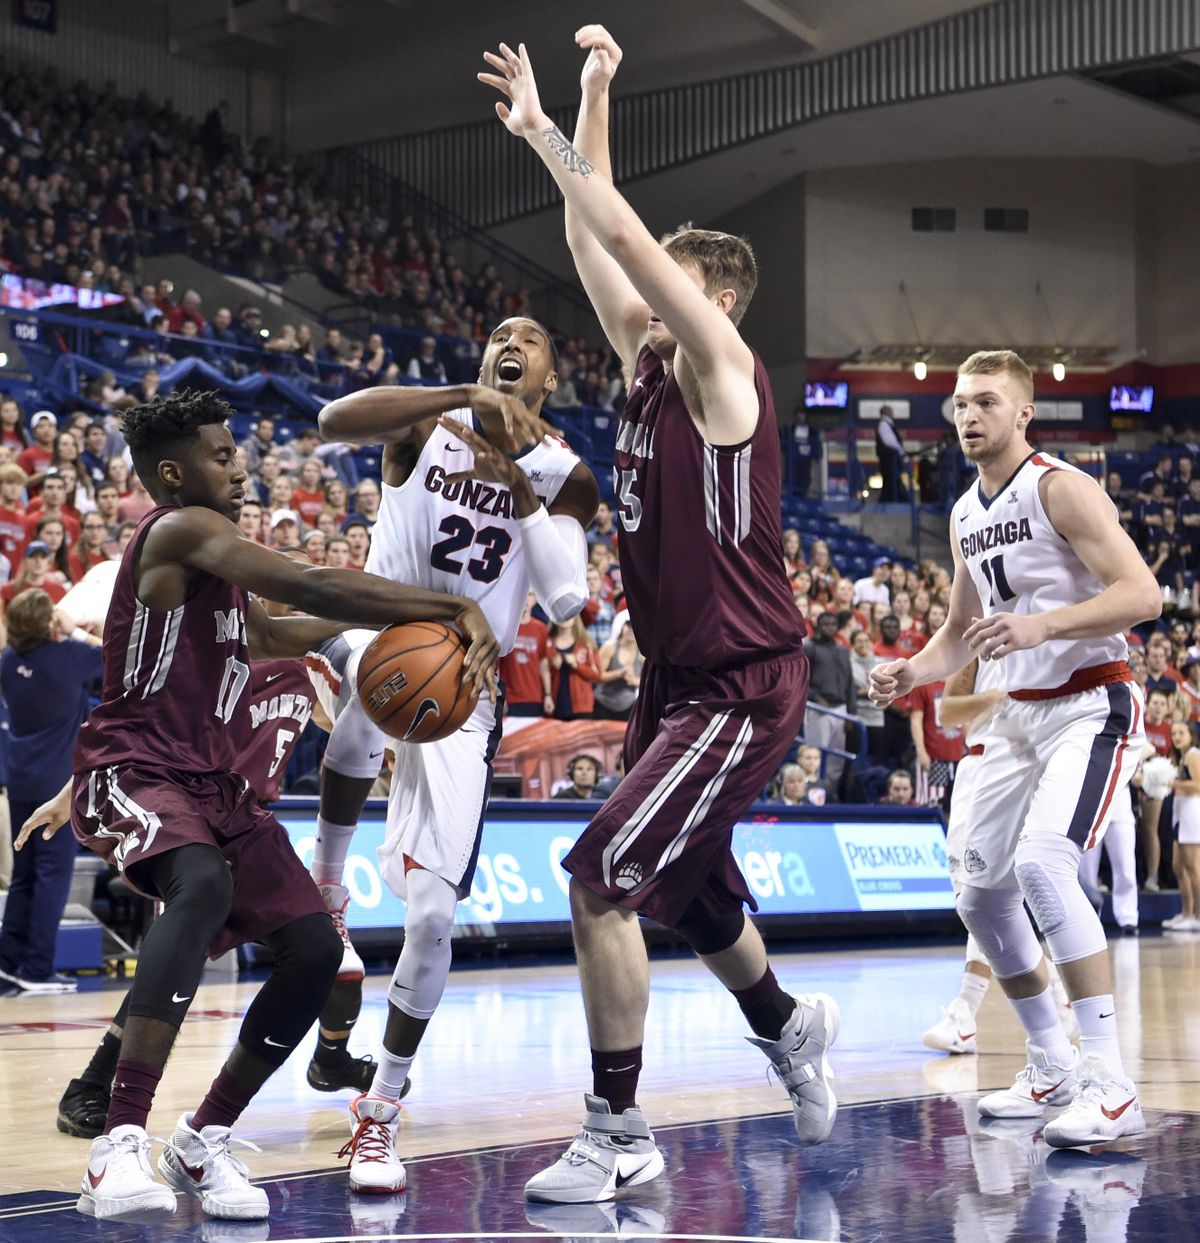 Gonzaga guard Eric McClellan (23) is stripped of the ball by Montana as he drives to the hoop during the first half of a college basketball game on Tuesday, Dec 8, 2015, at McCarthey Athletic Center in Spokane, Wash. (Tyler Tjomsland / The Spokesman-Review)